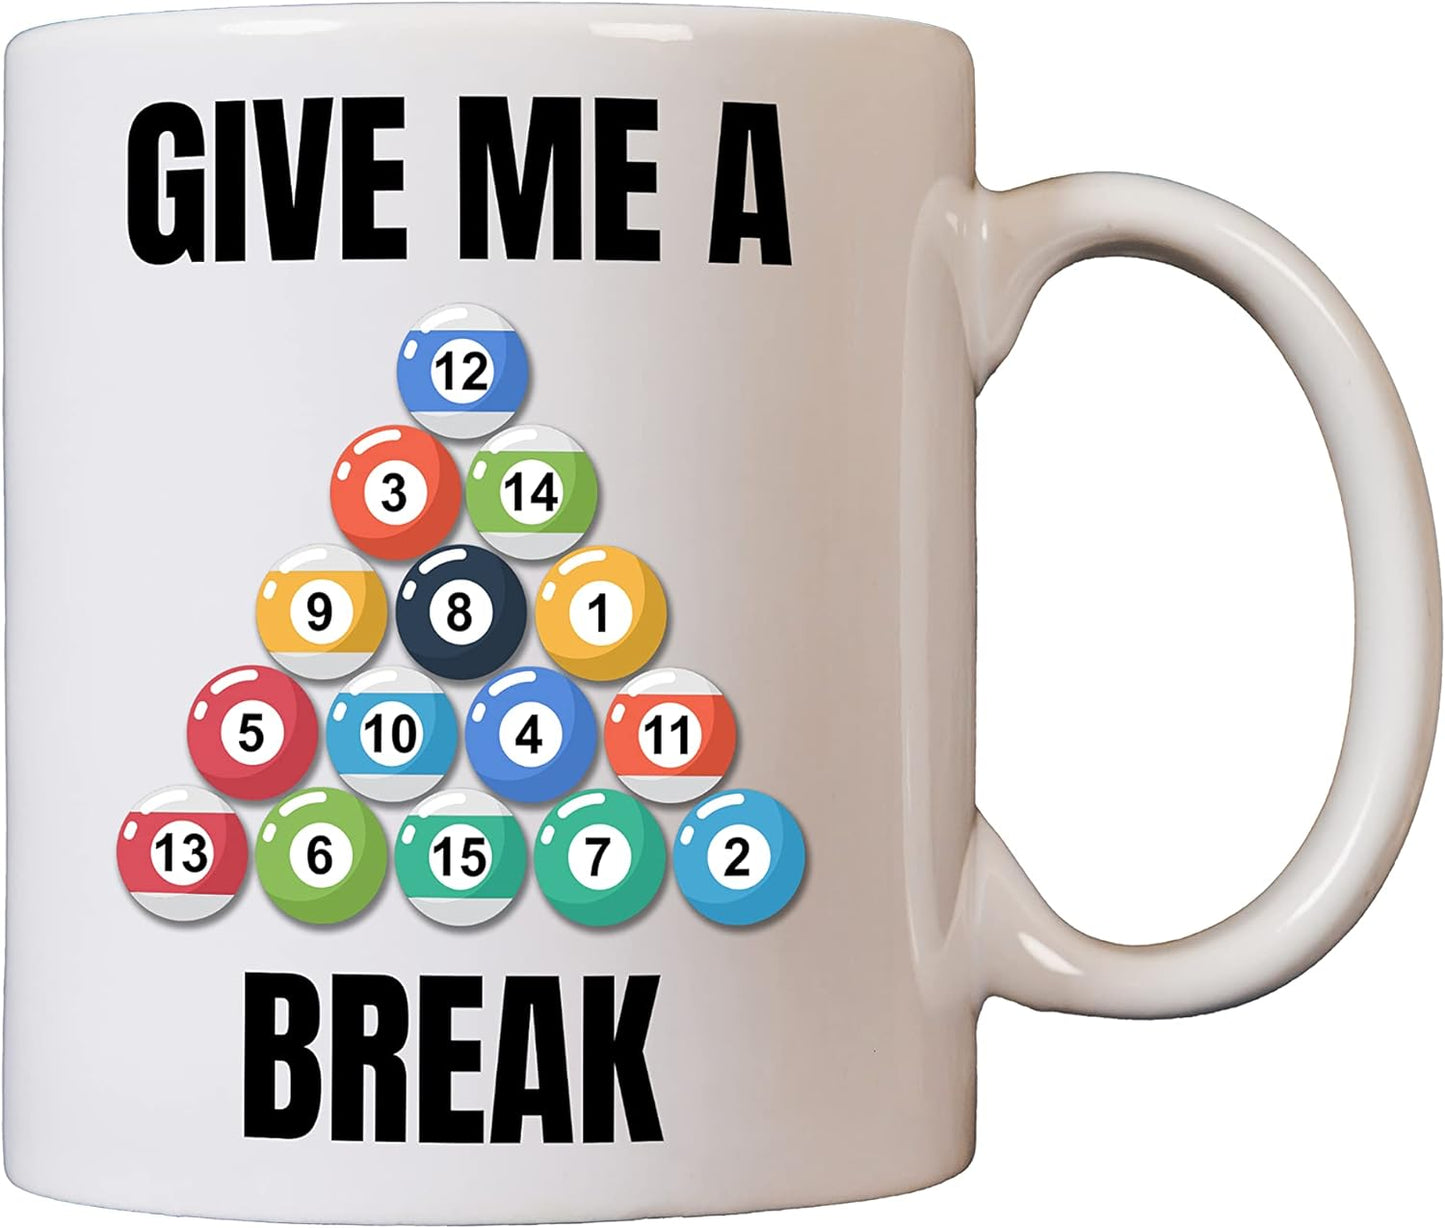 Pool / Snooker Mugs - Give Me a Break! - Double Sided Printed Design - Microwave & Dishwasher Safe